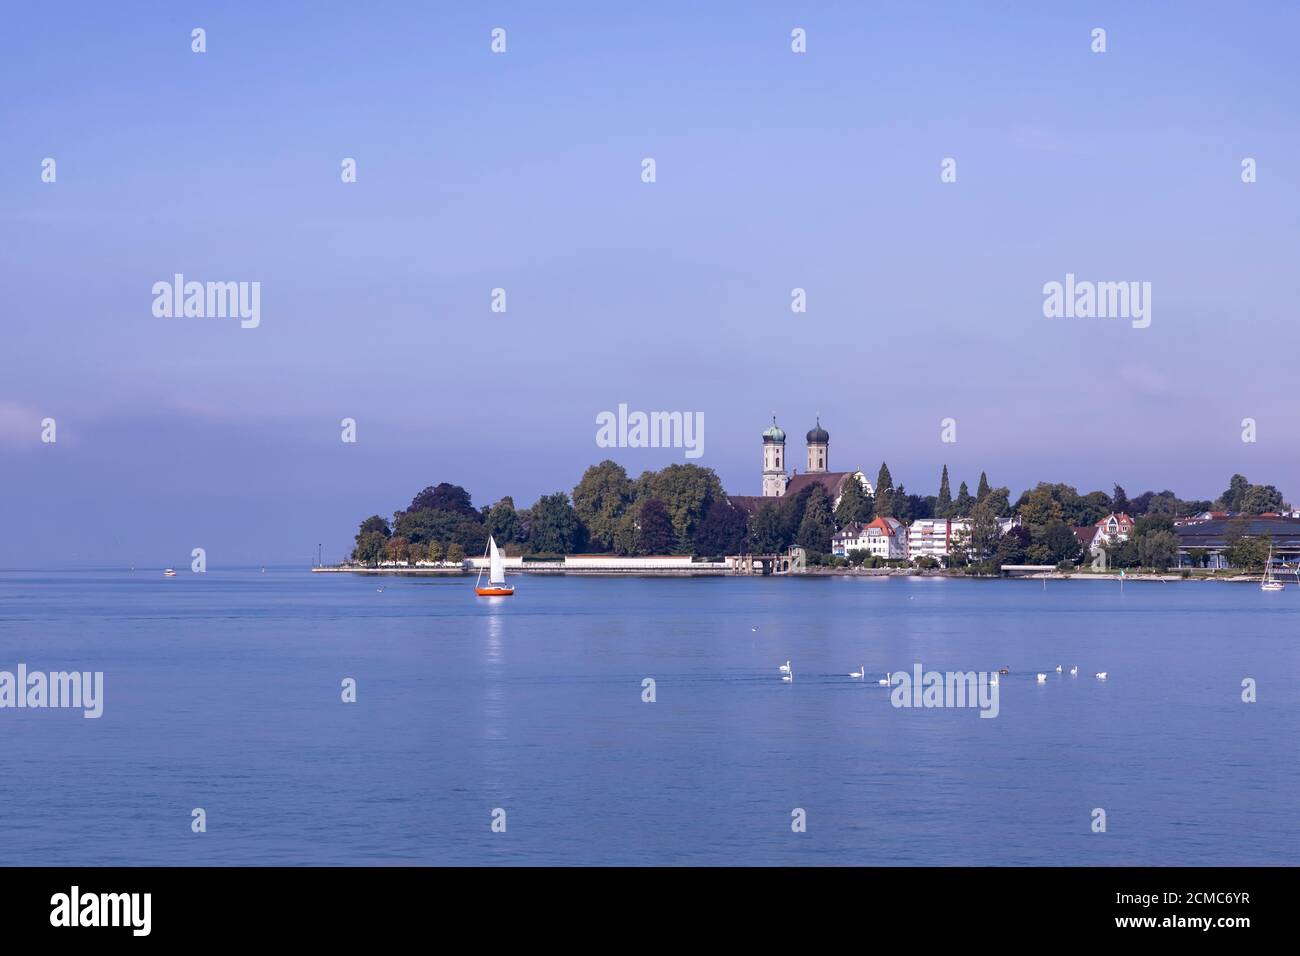 Bodensee Lake Constance and Palace Church Is The Landmark Of The Town Friedrichshafen Germany Europe. Stock Photo